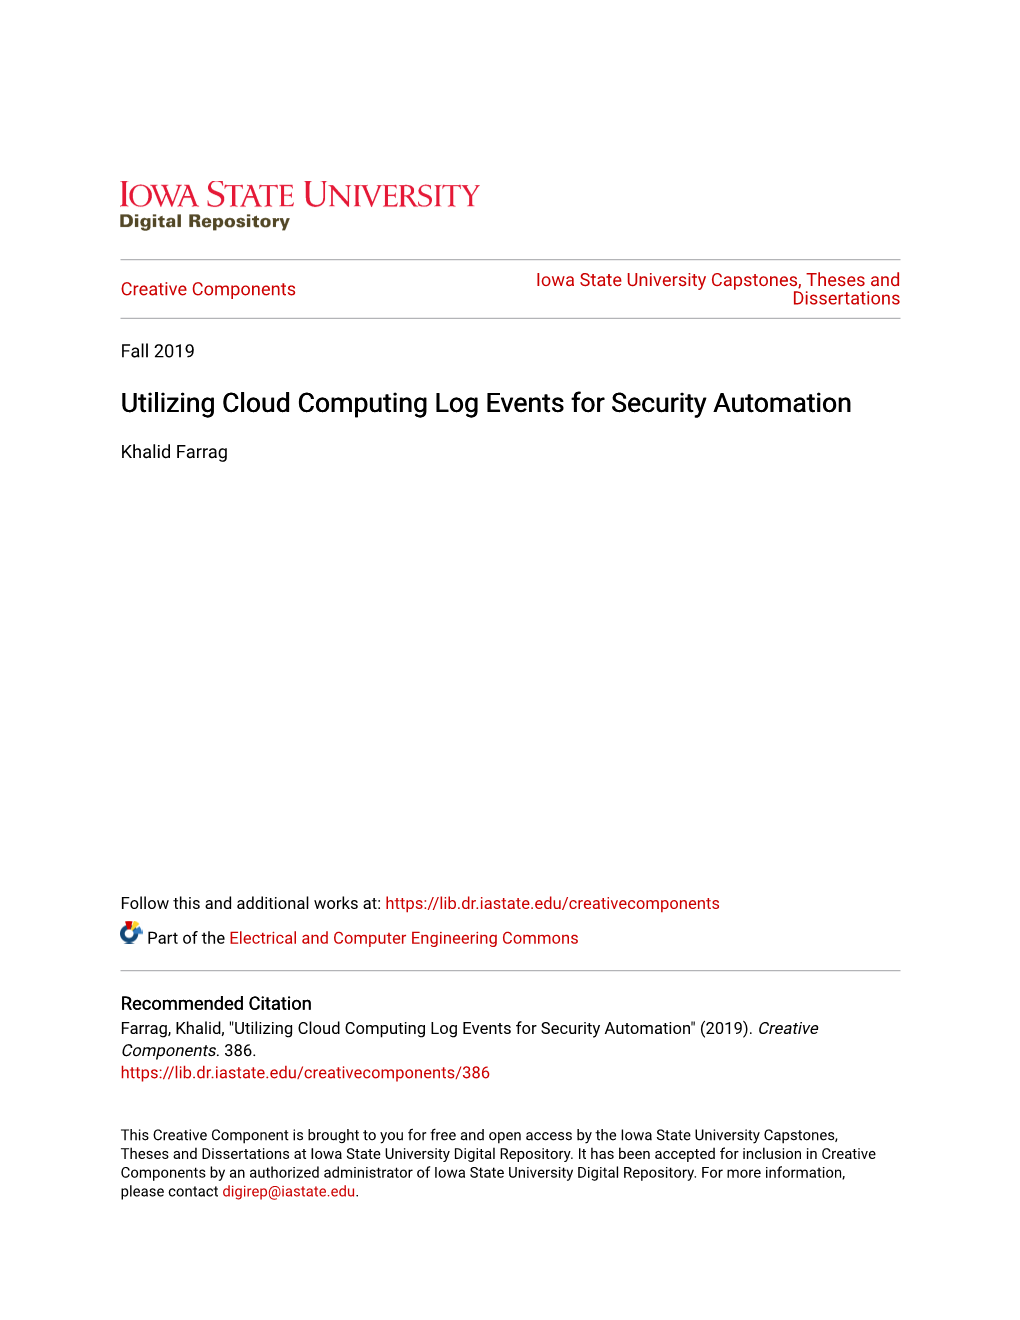 Utilizing Cloud Computing Log Events for Security Automation